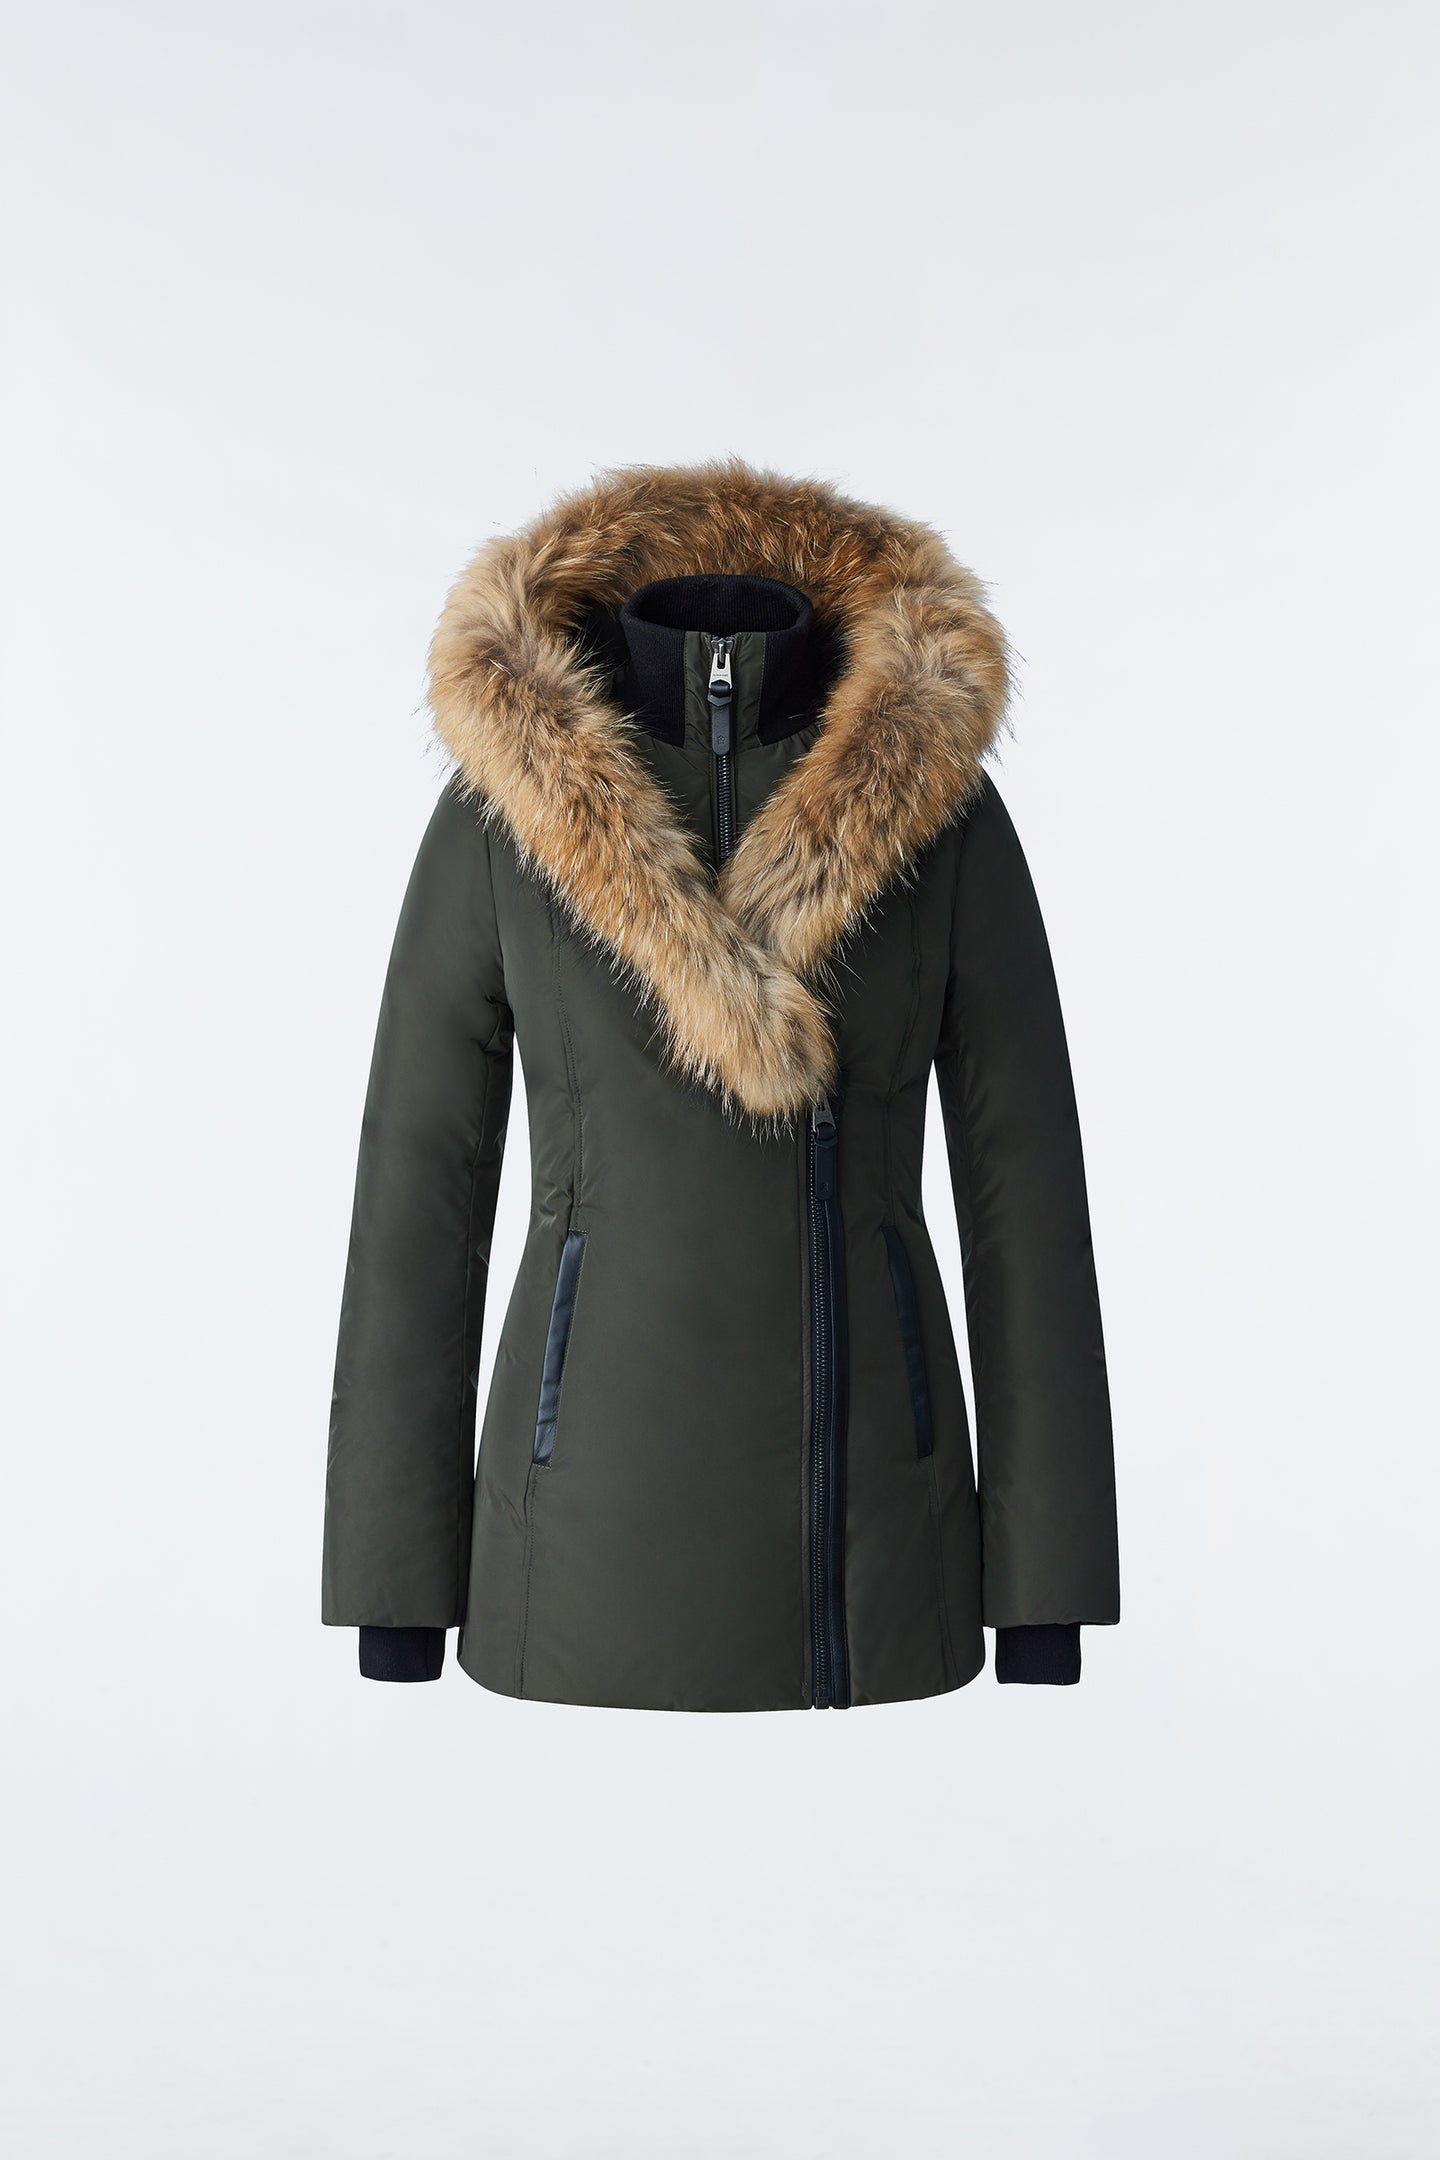 Signature Double-Faced Coat - Ready to Wear